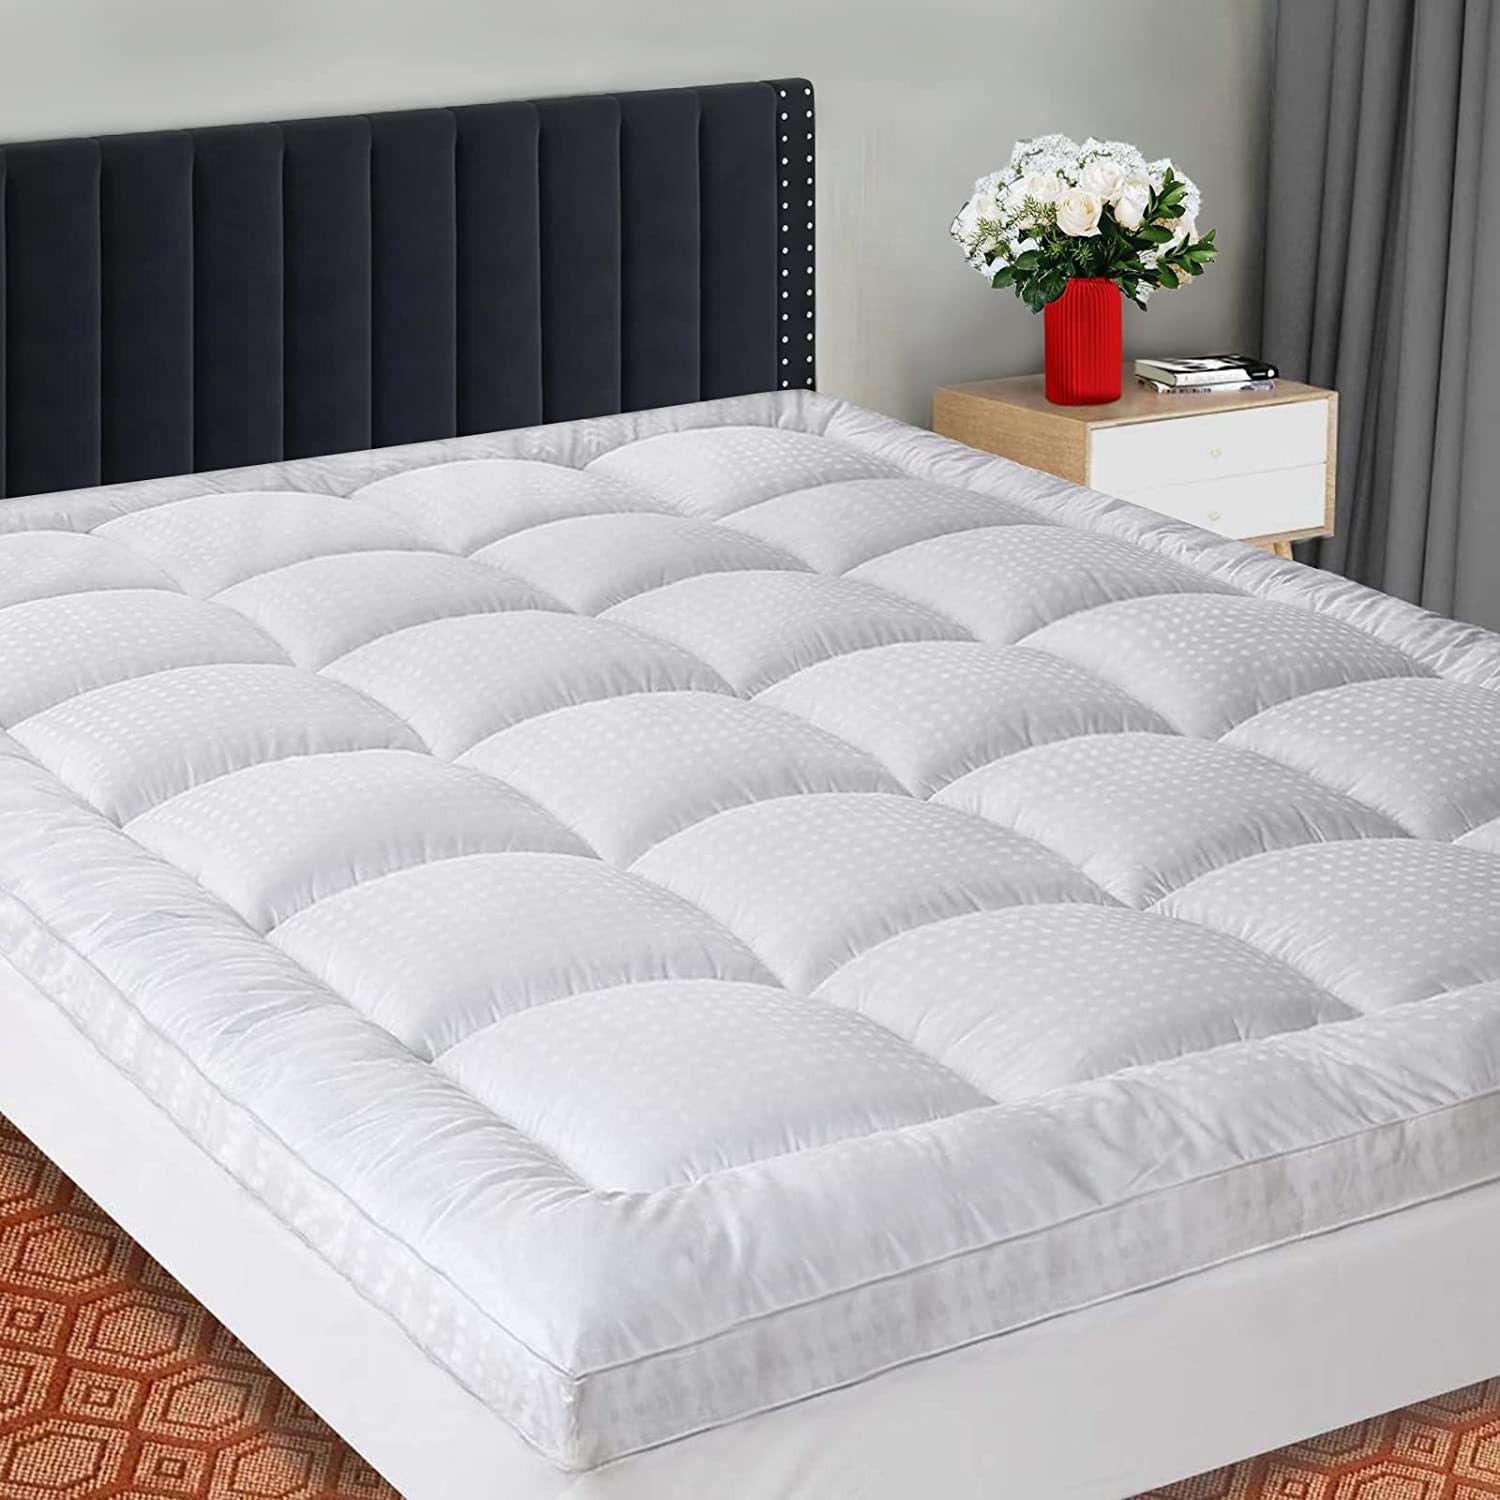 Why Do You Need A Mattress Topper? 